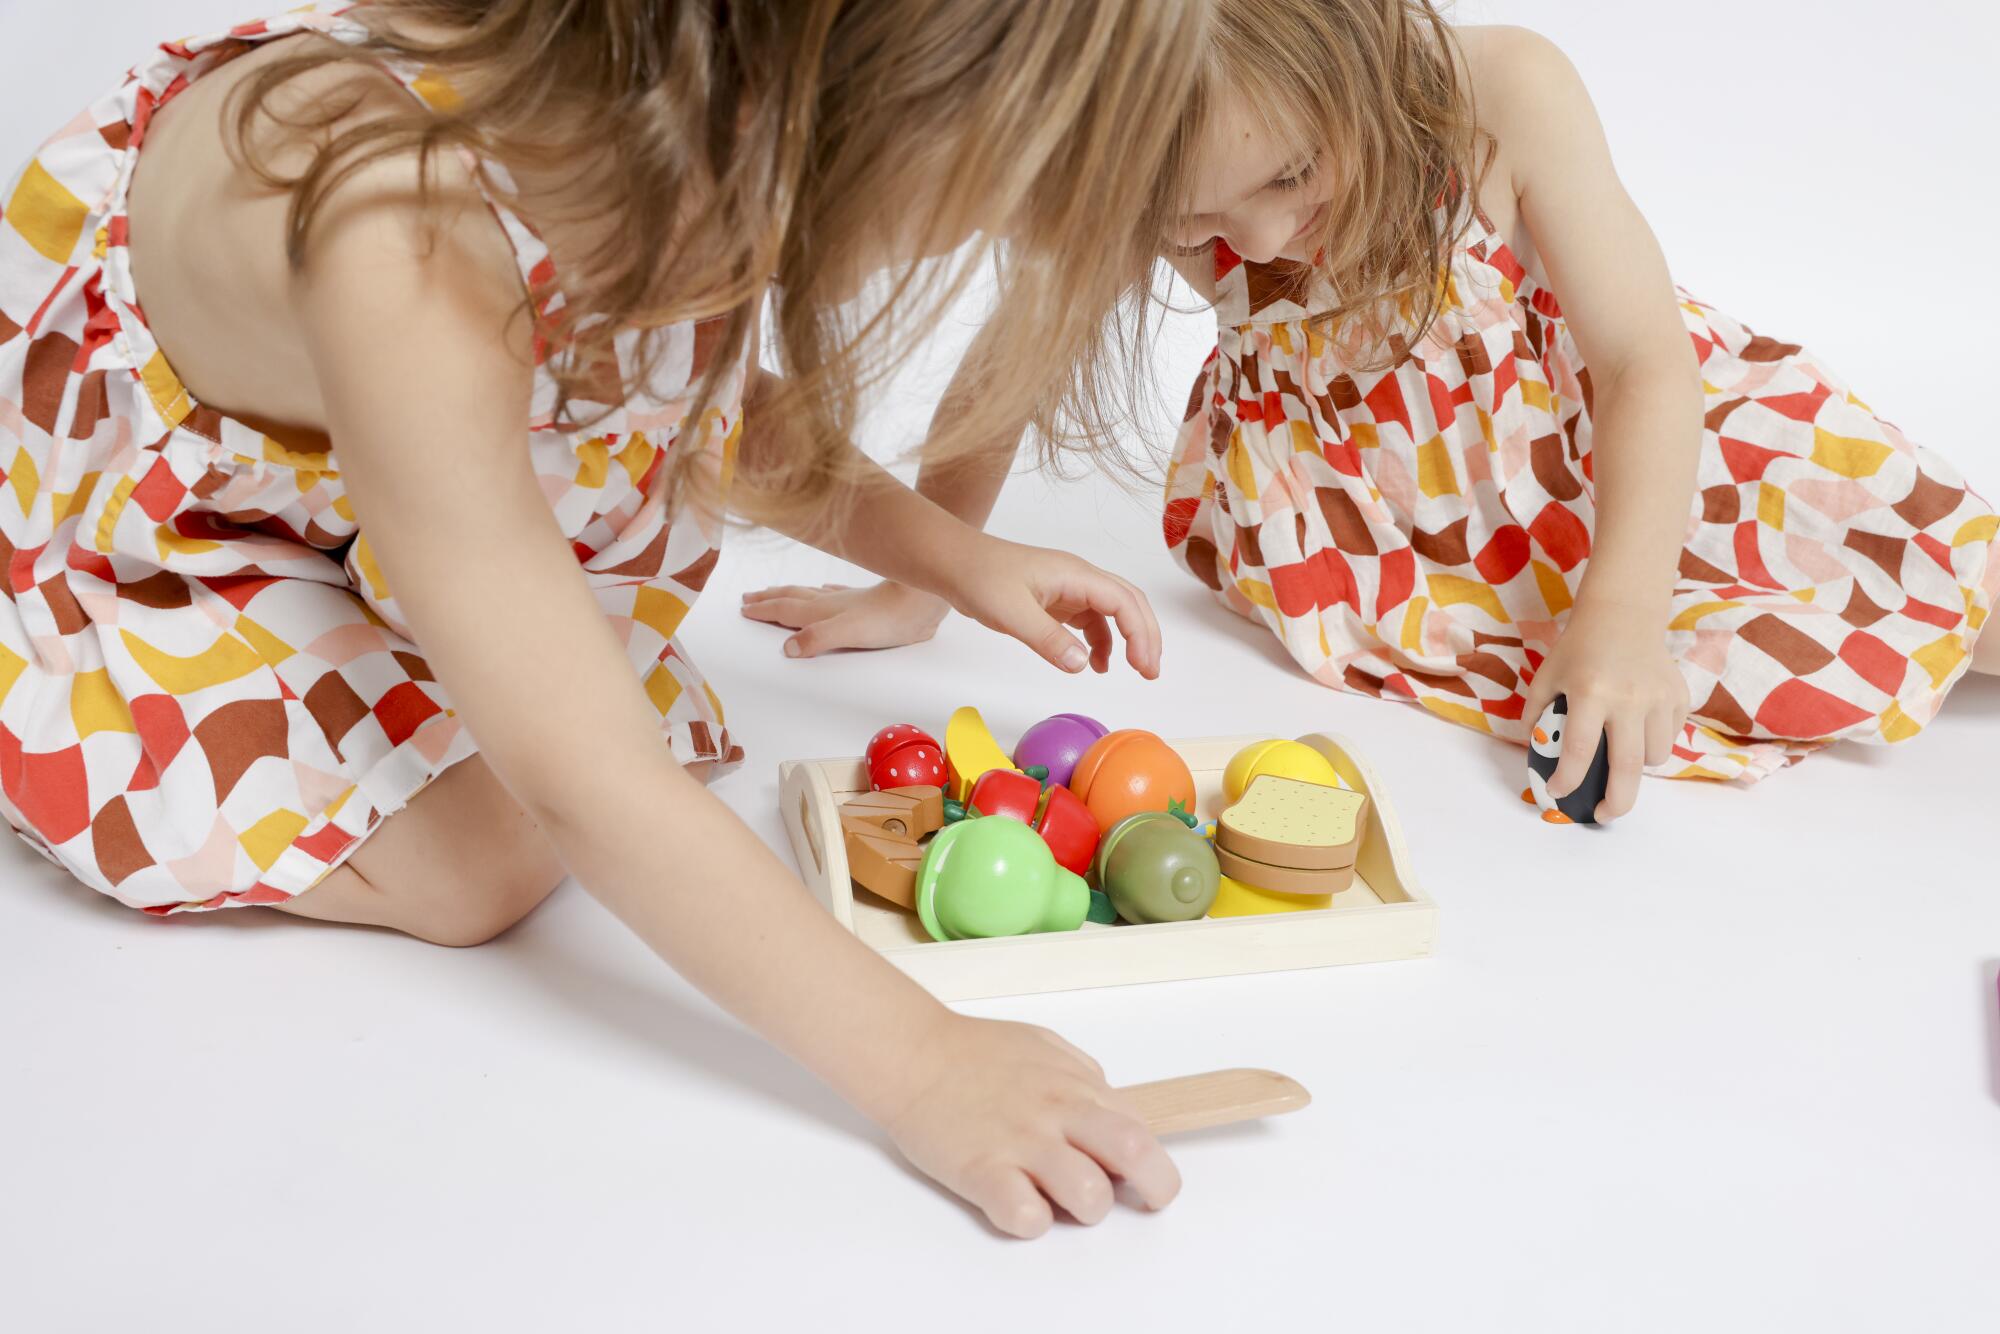  River and Penny Atchison, left and right, play with wooden and plastic toys at their home.